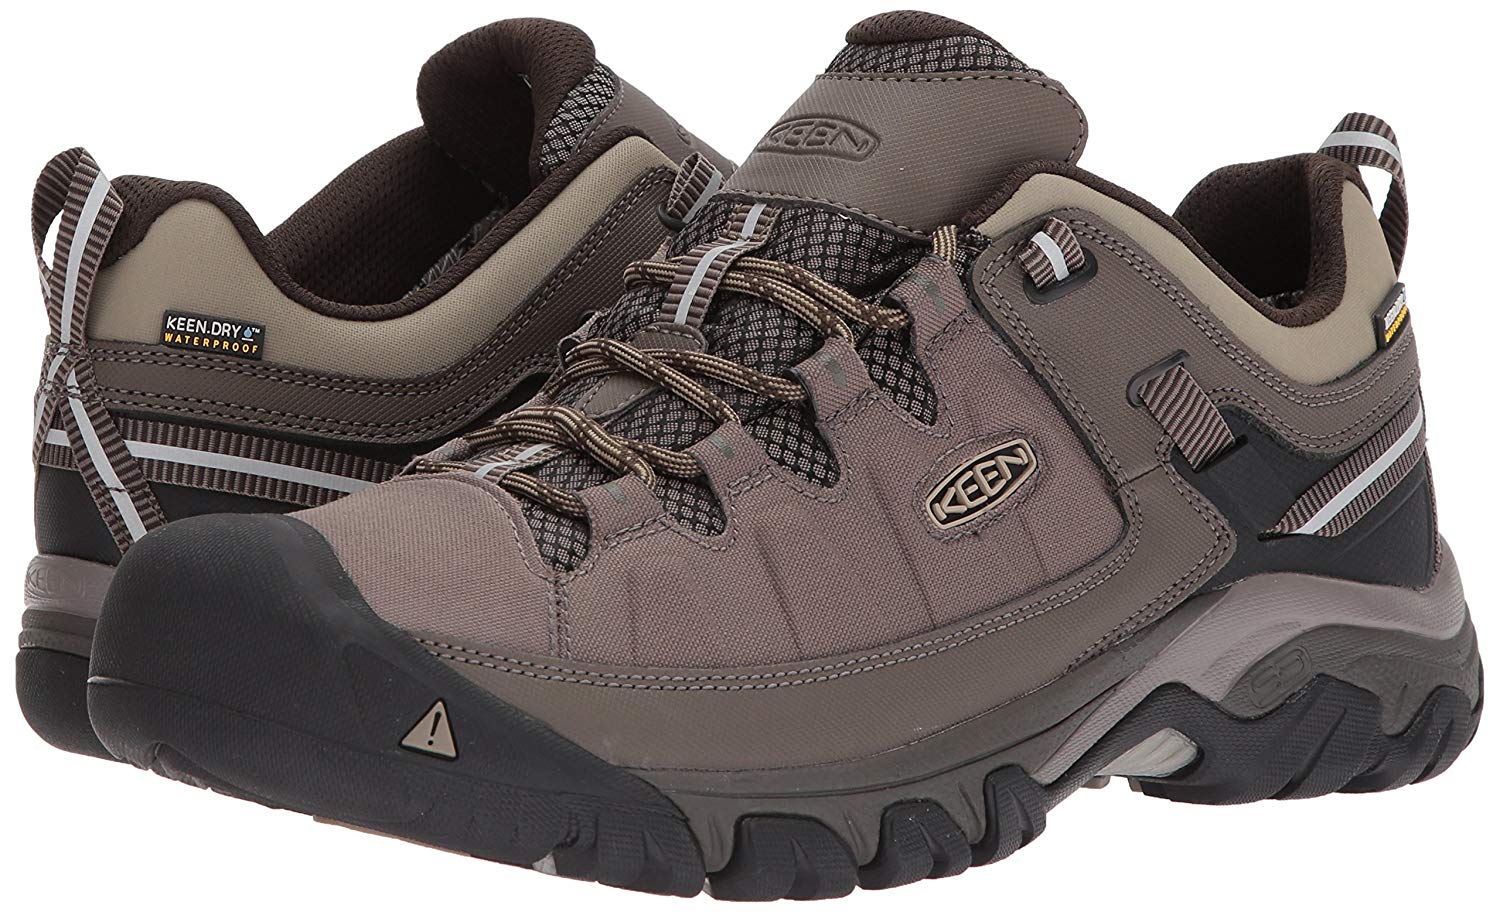 Best Trekking Shoes highly recommended